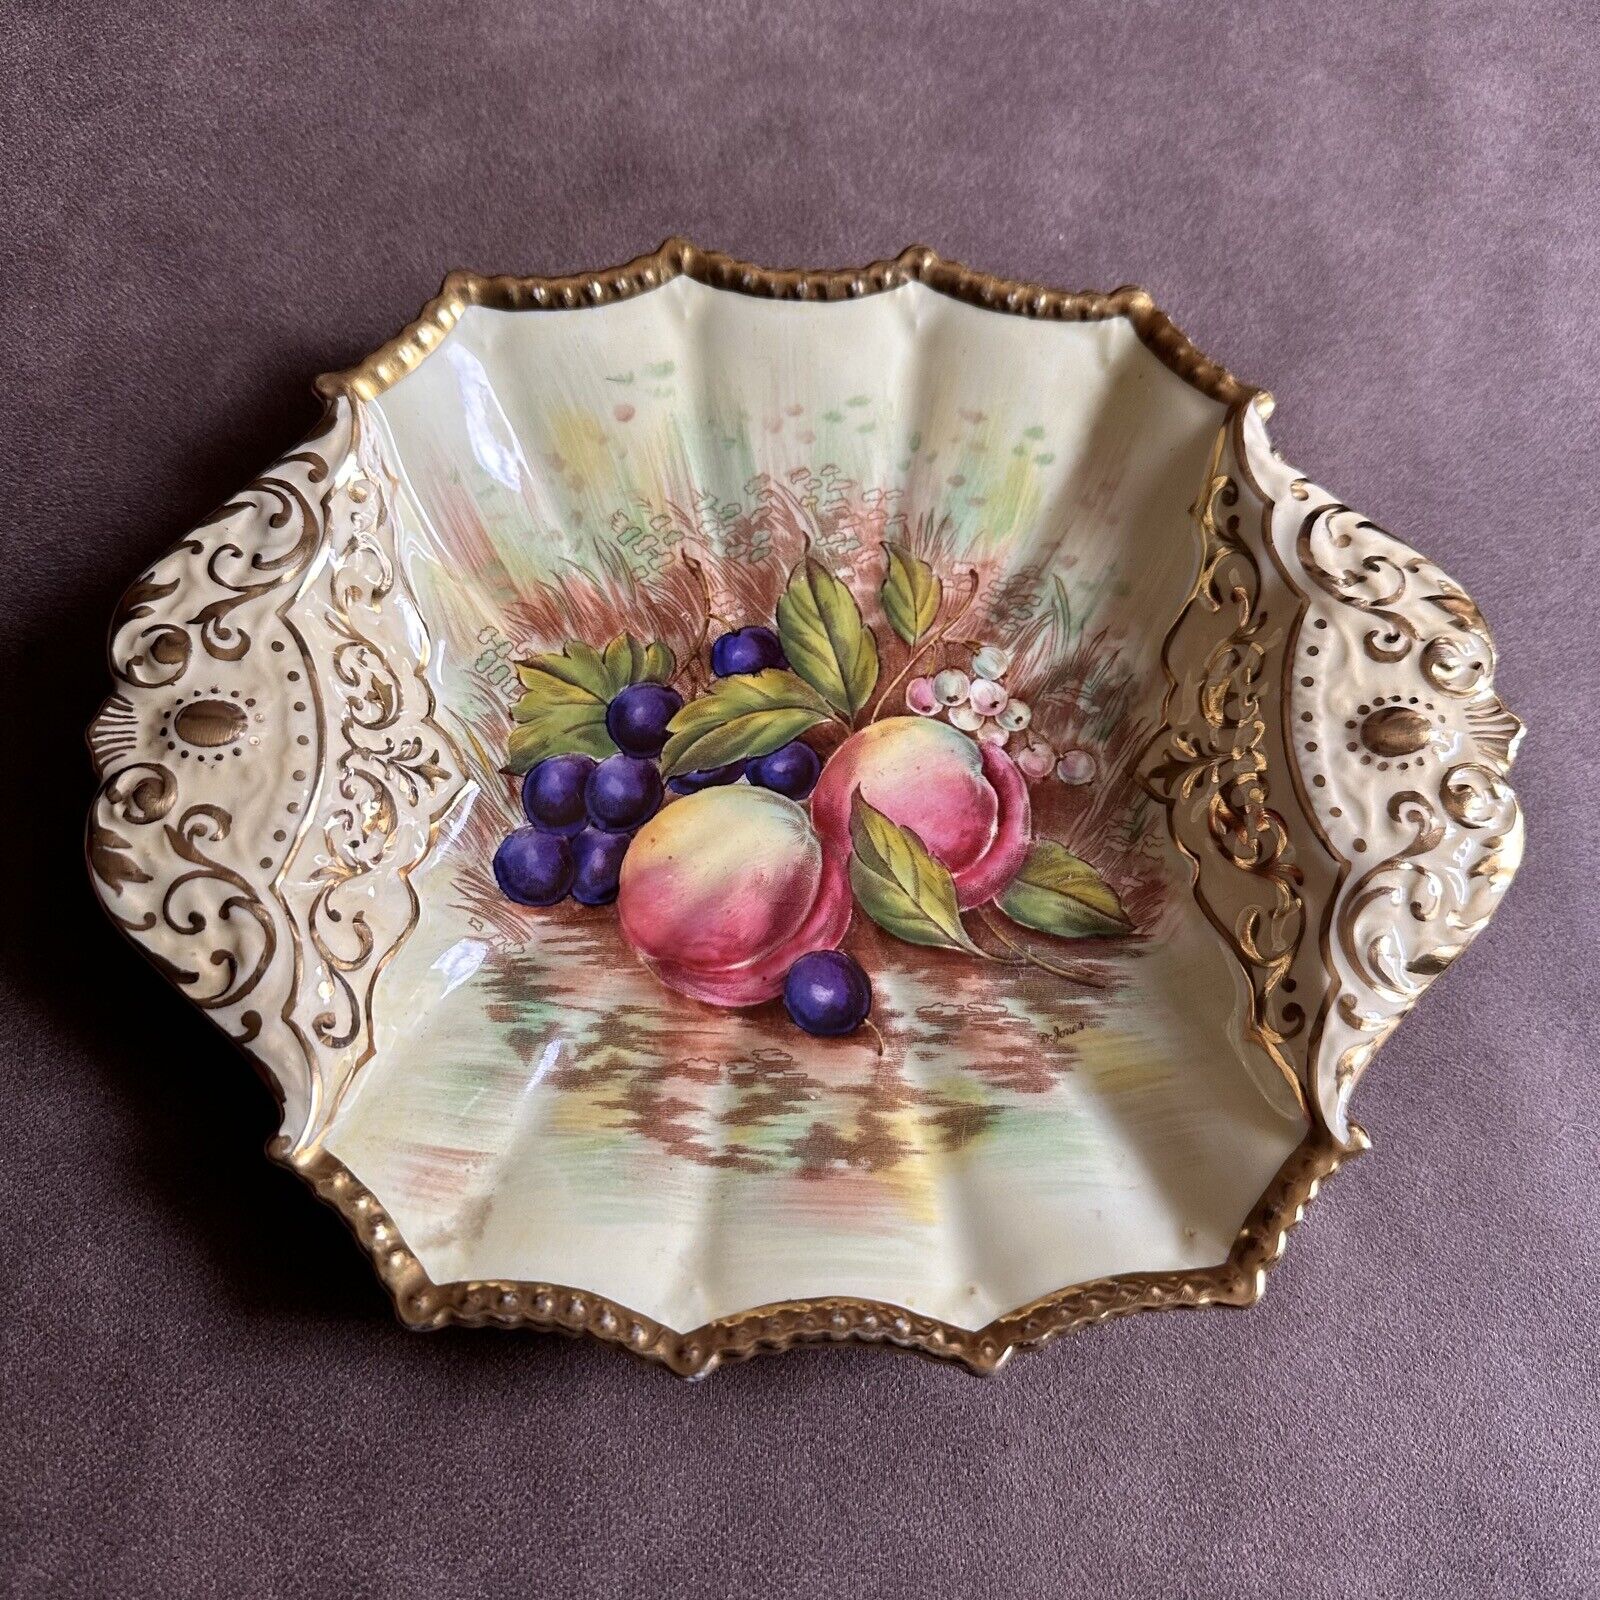 VINTAGE AYNSLEY BONE CHINA D. JONES ORCHARD GOLD DISH MADE IN ENGLAND